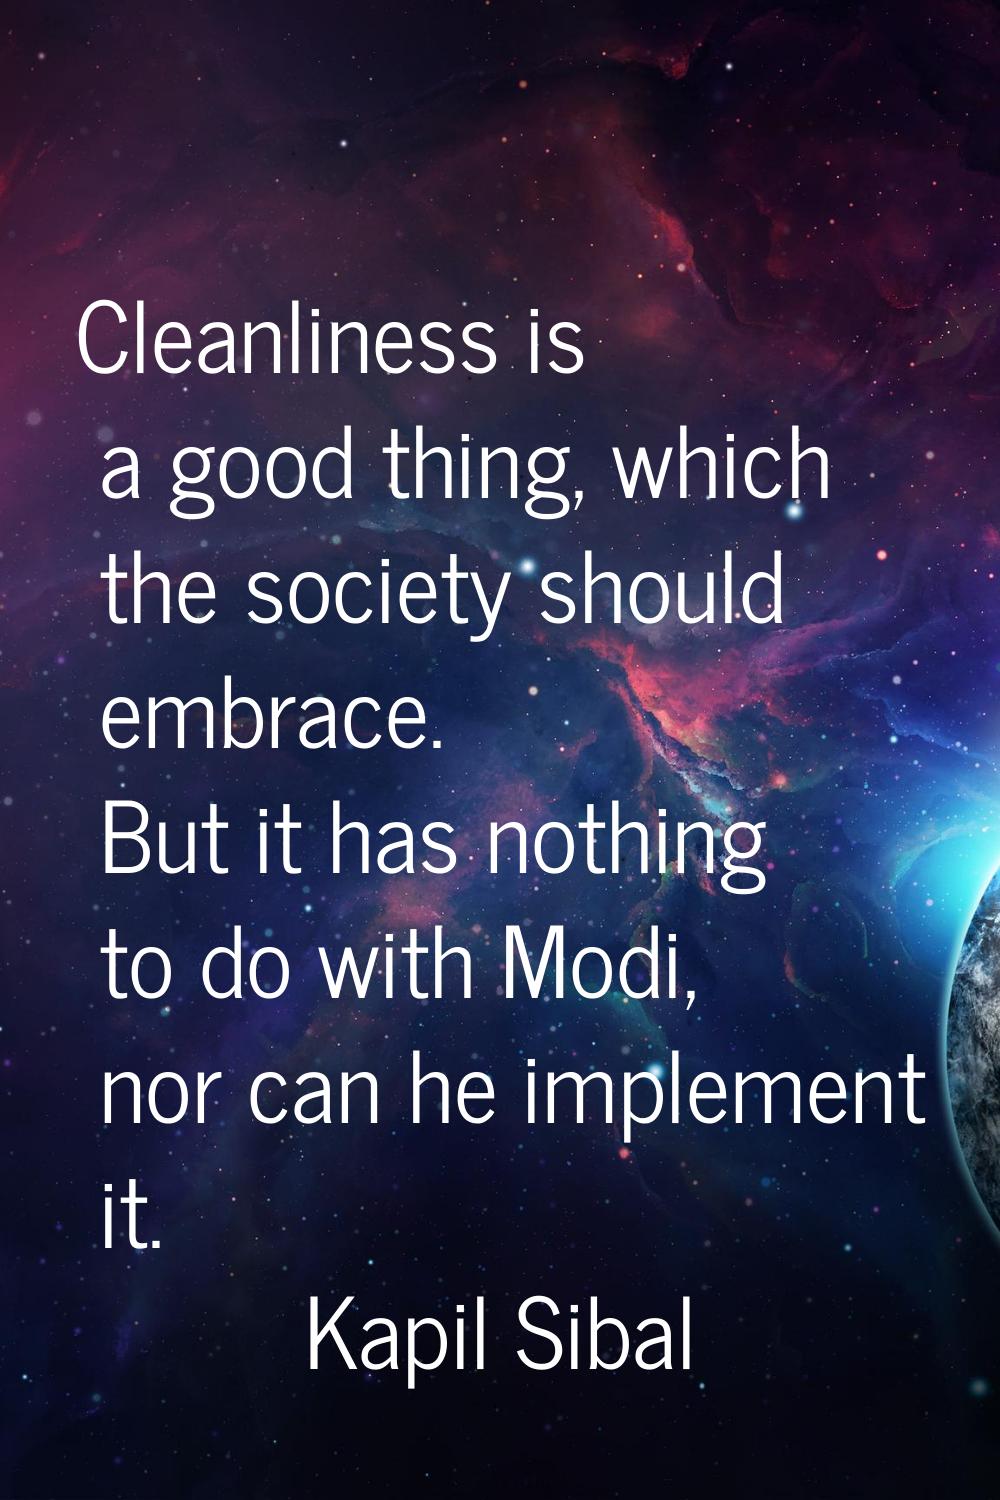 Cleanliness is a good thing, which the society should embrace. But it has nothing to do with Modi, 